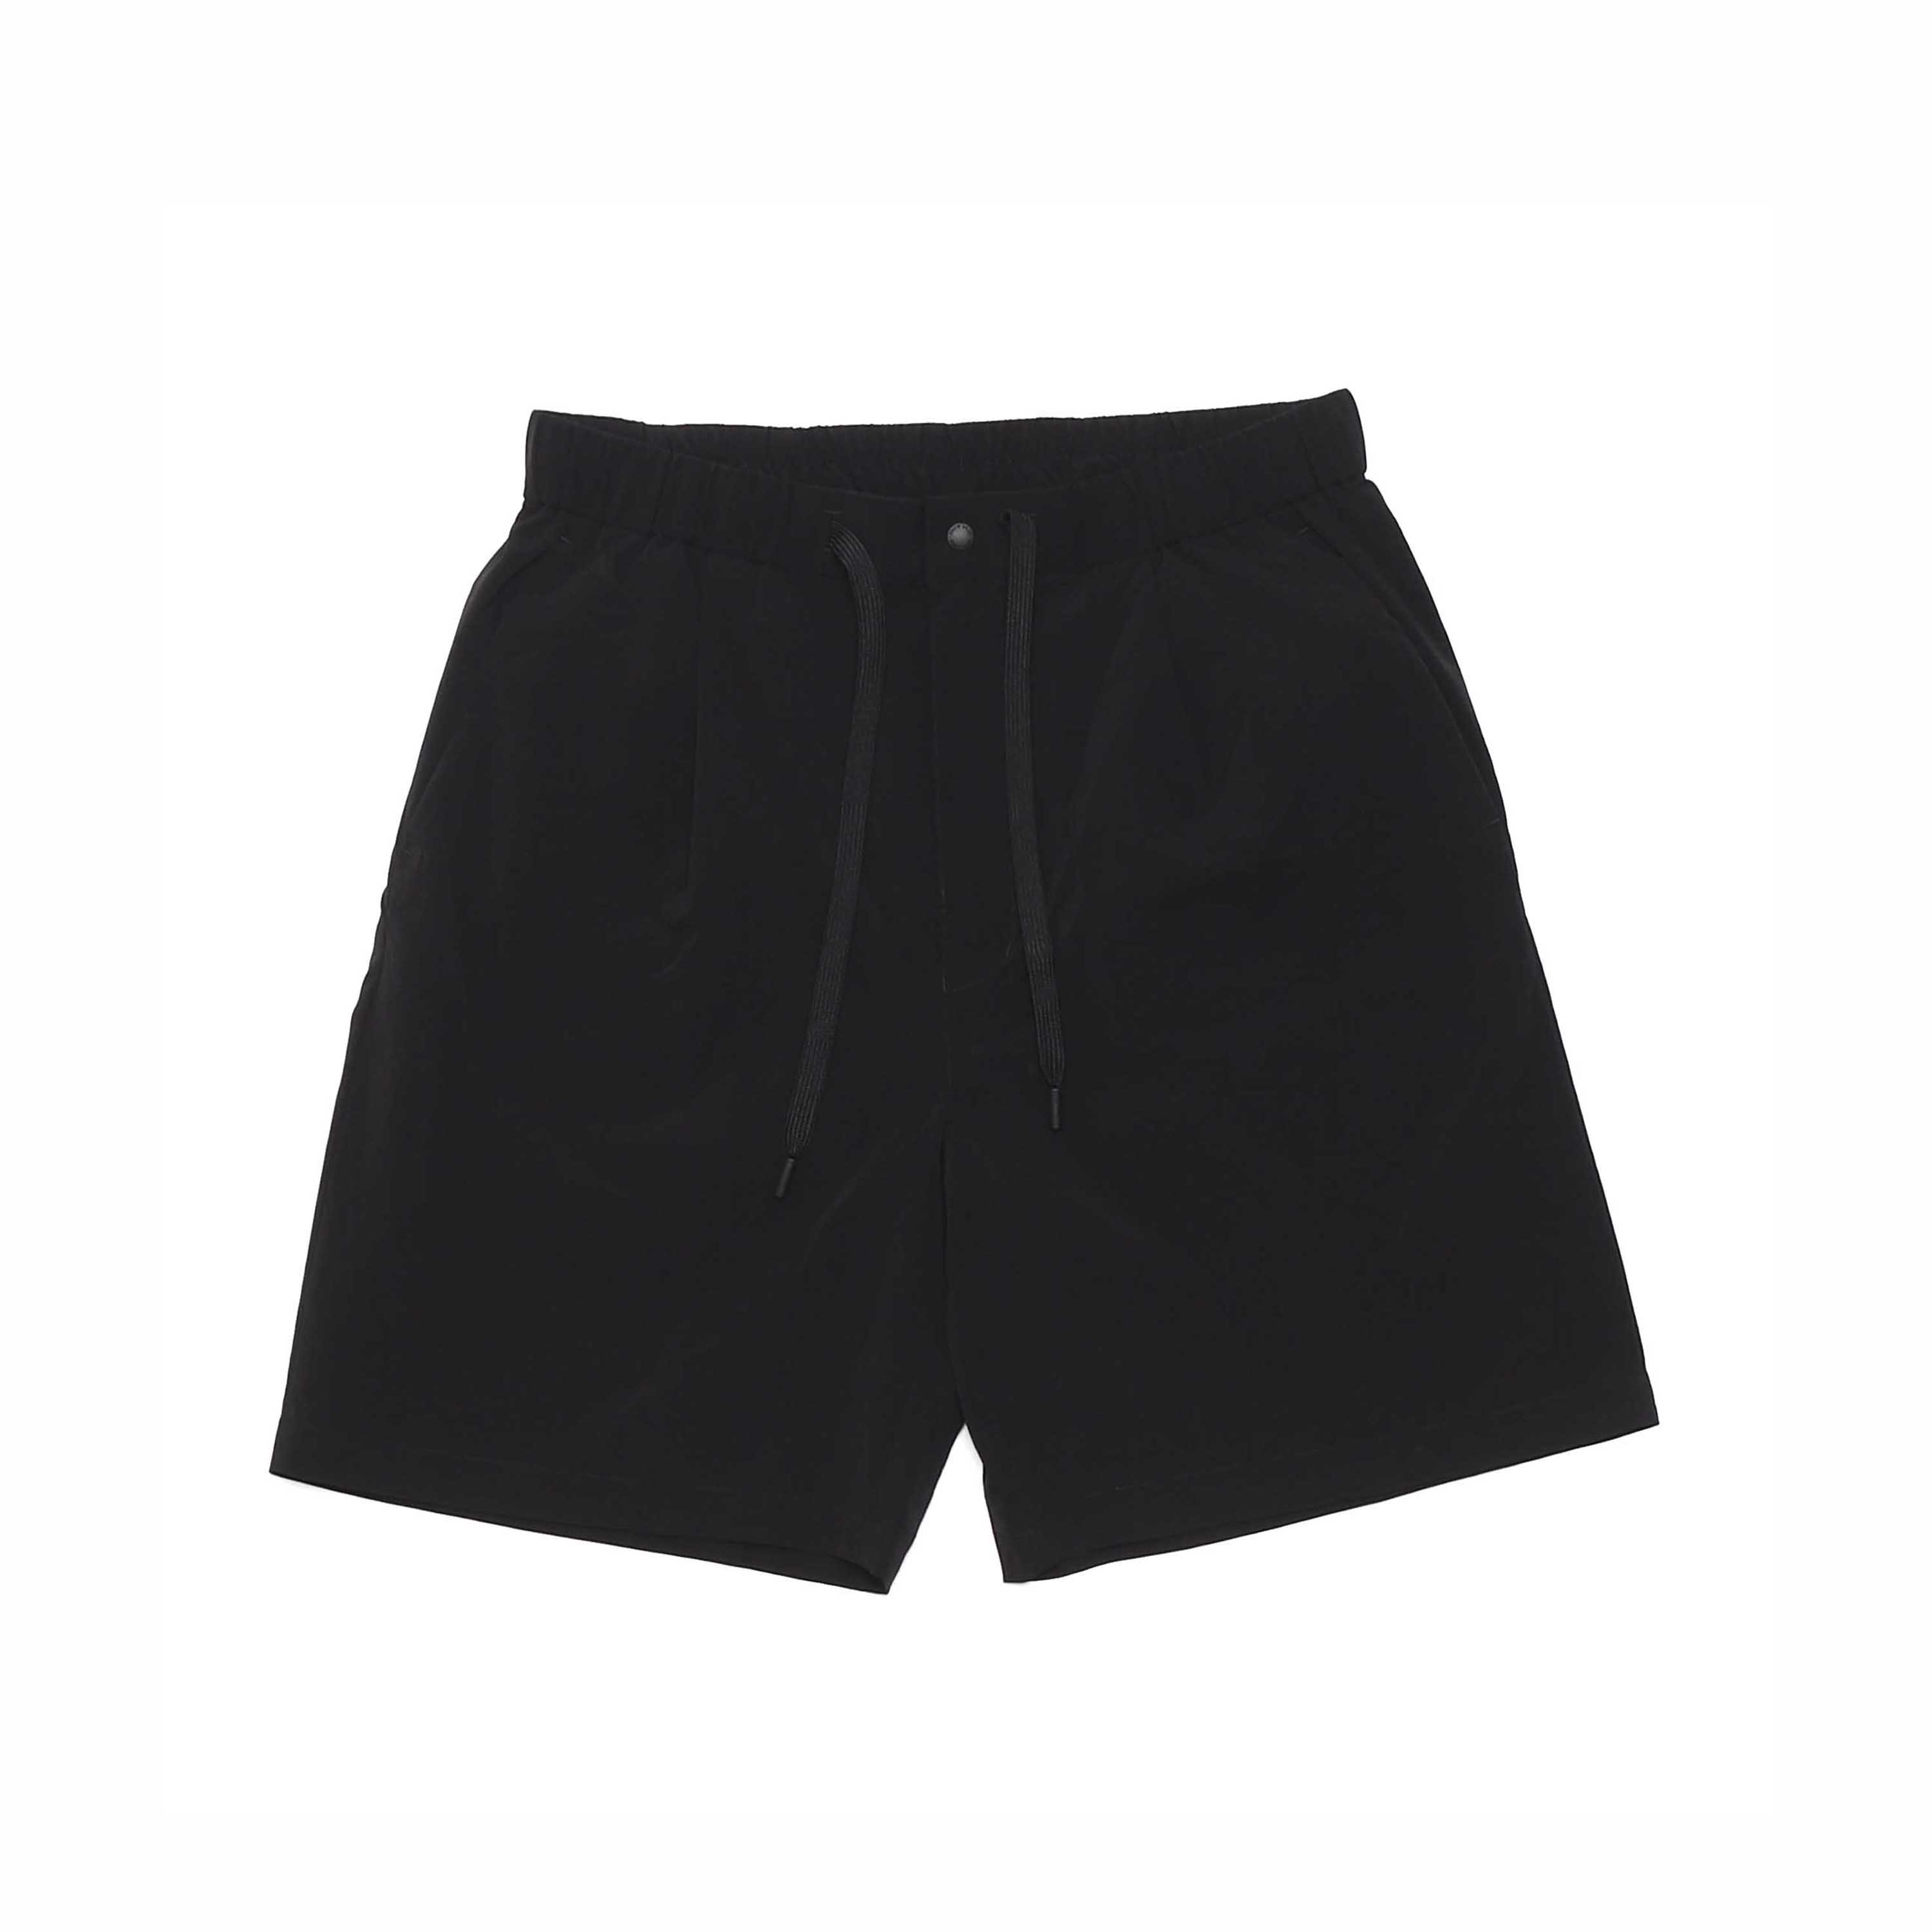 BREATHABLE QUICK DRY SHORTS - BLACK